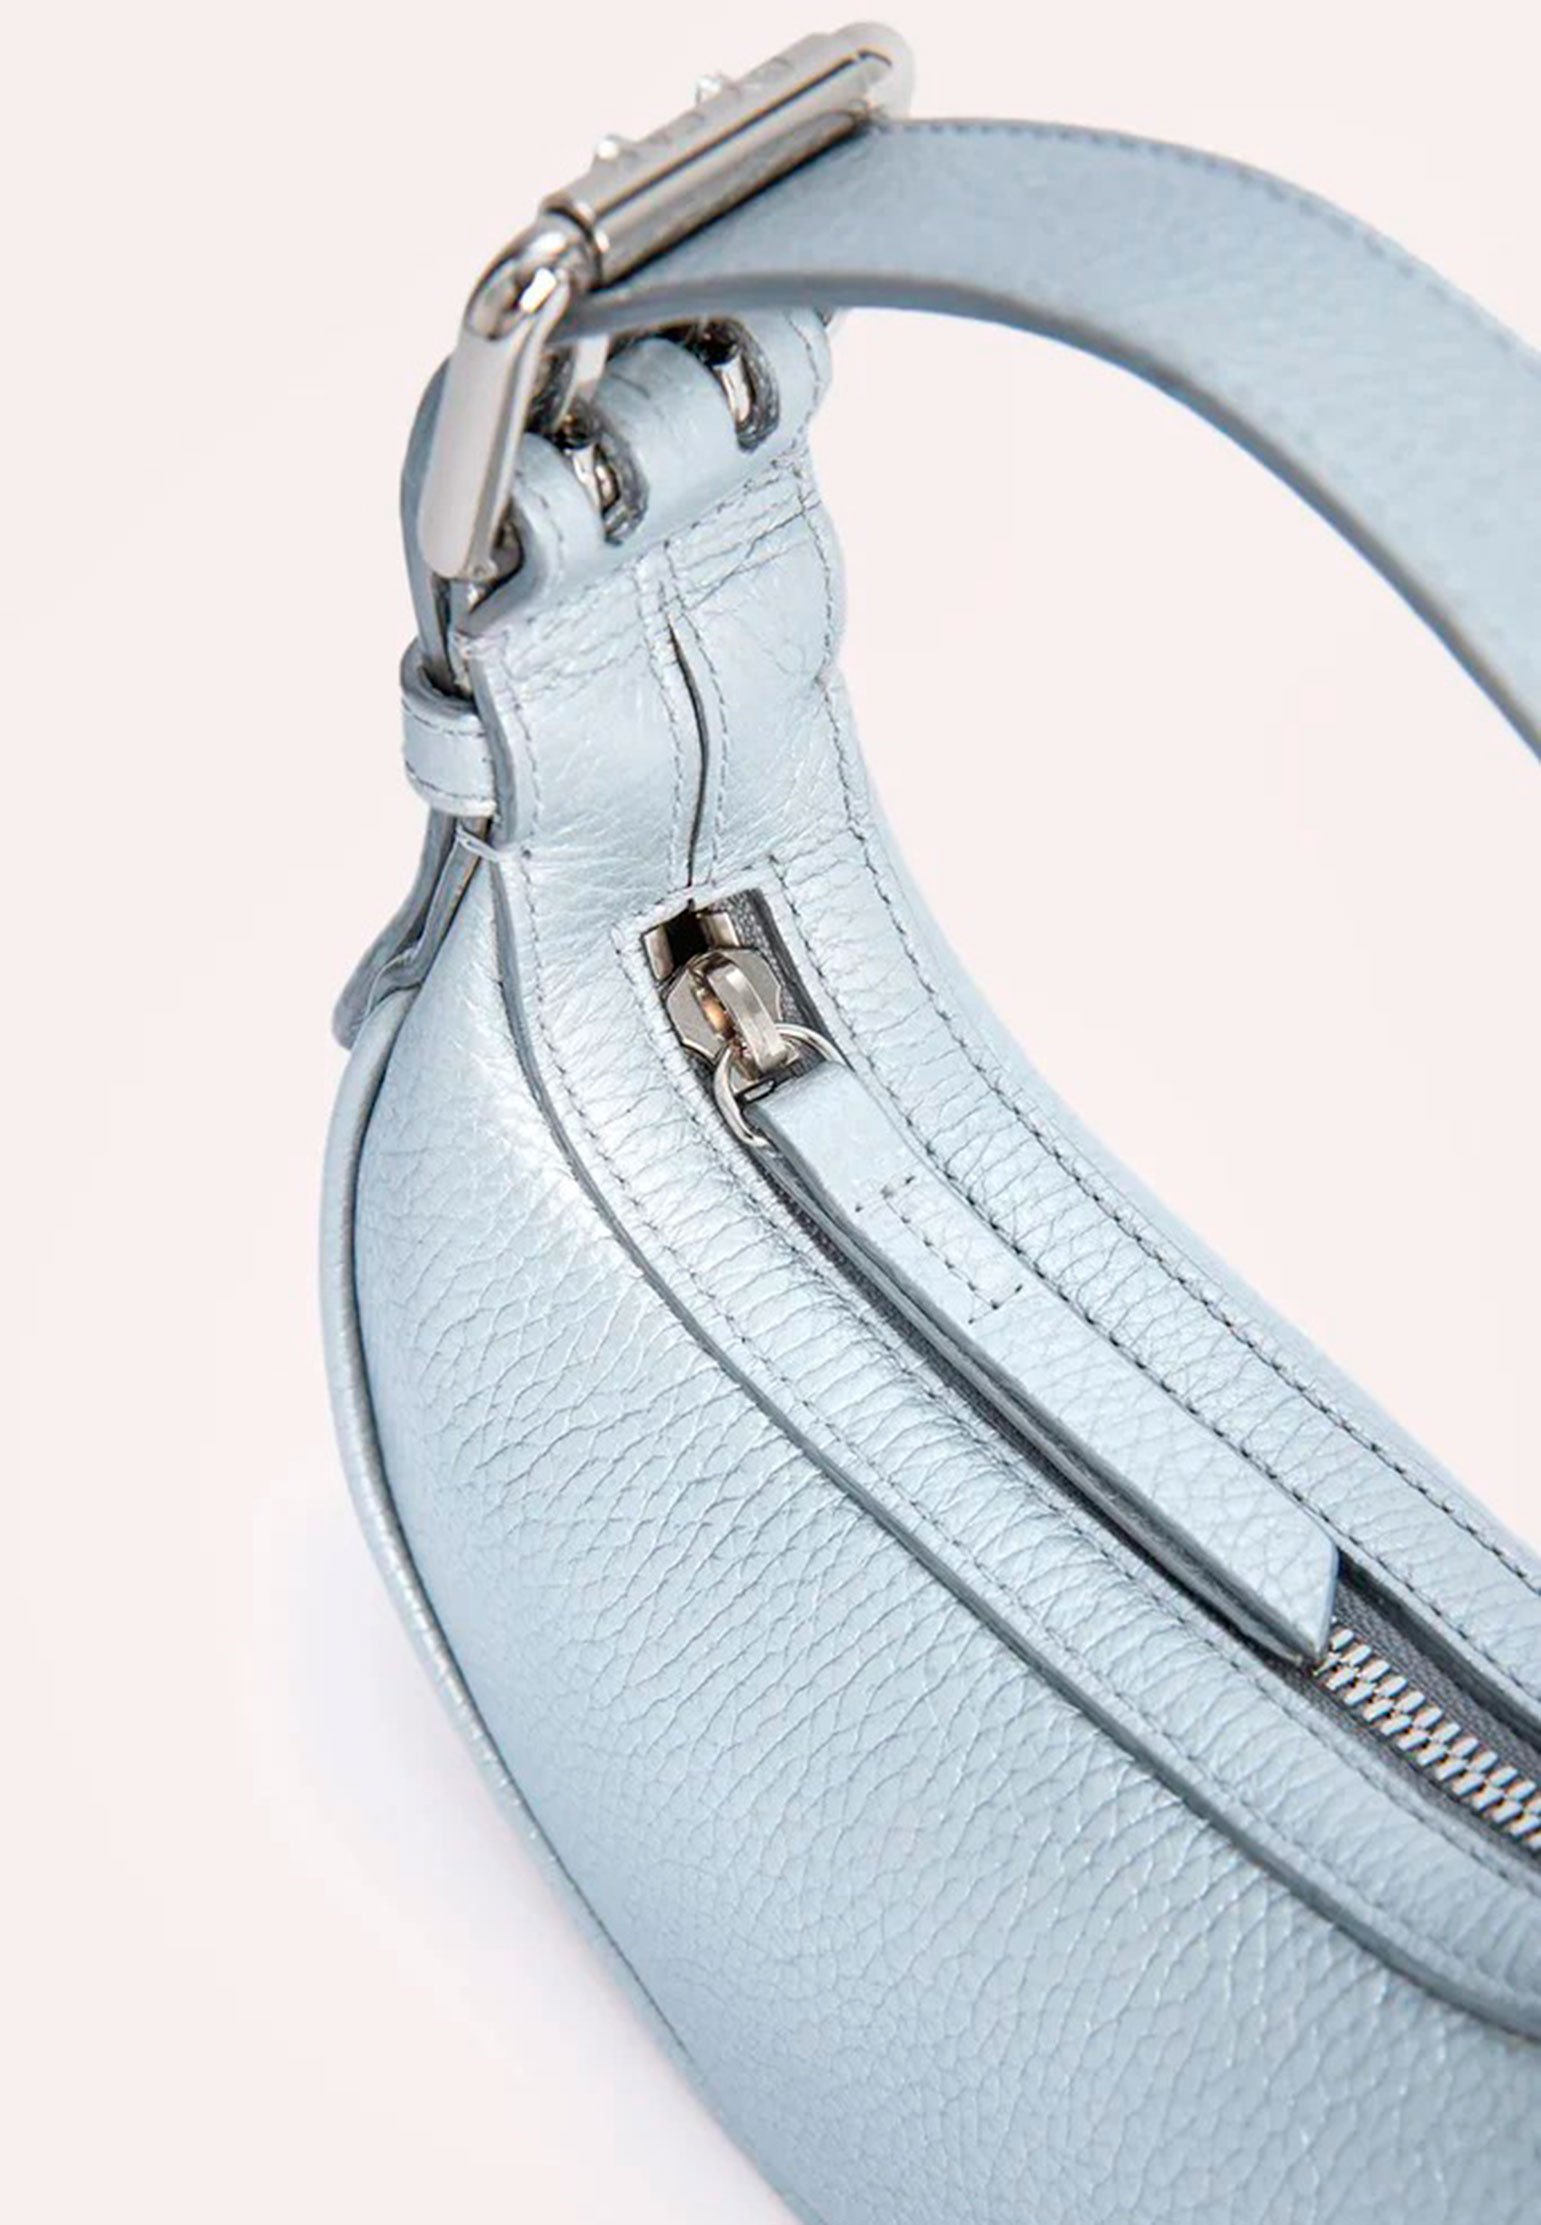 Bag BY FAR Color: grey (Code: 1136) in online store Allure